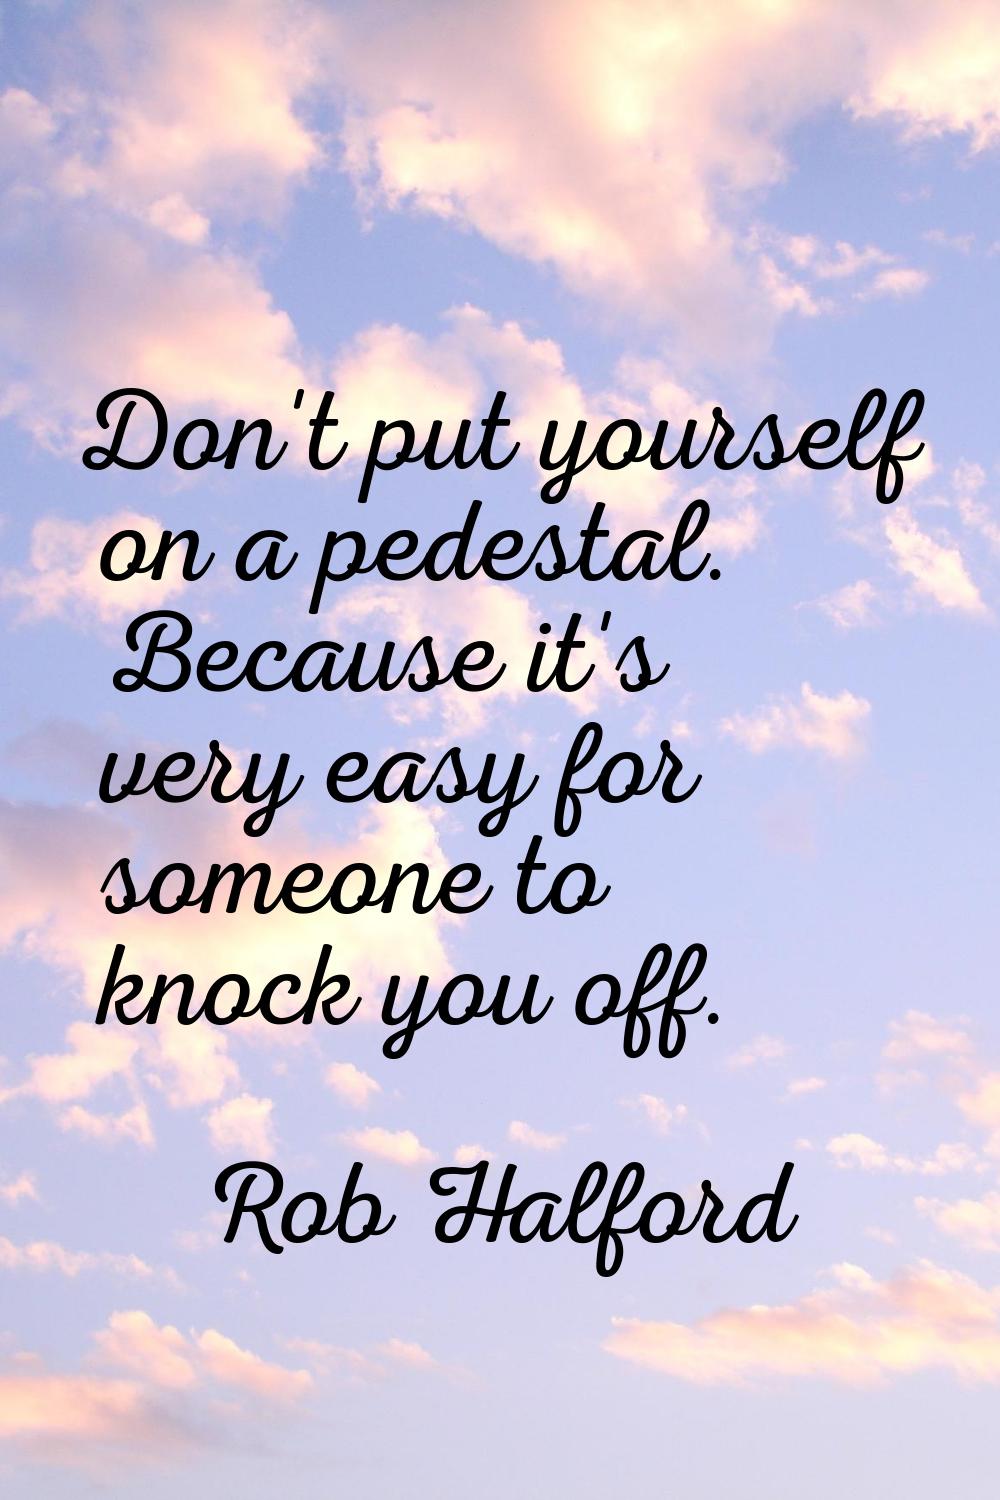 Don't put yourself on a pedestal. Because it's very easy for someone to knock you off.